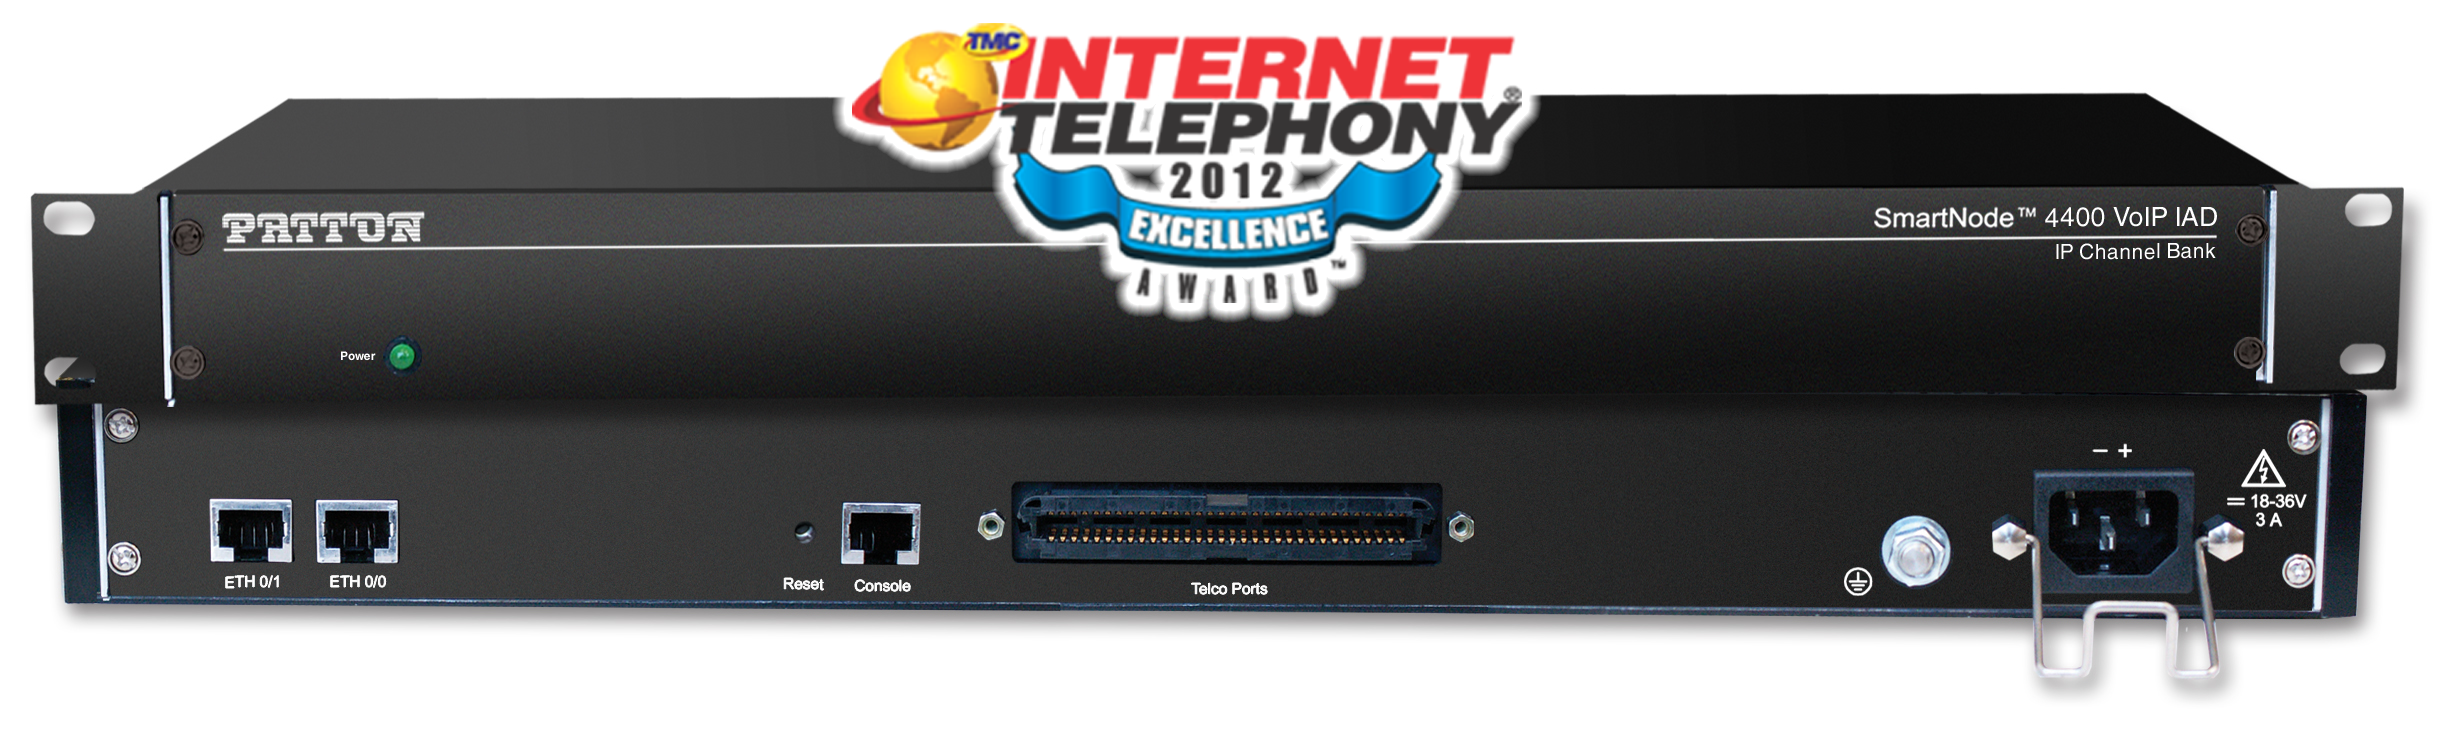 Patton SmartNode SN4400 IpChannelBank Analog VoIP Router | 12 to 32 FXS or FXO ports